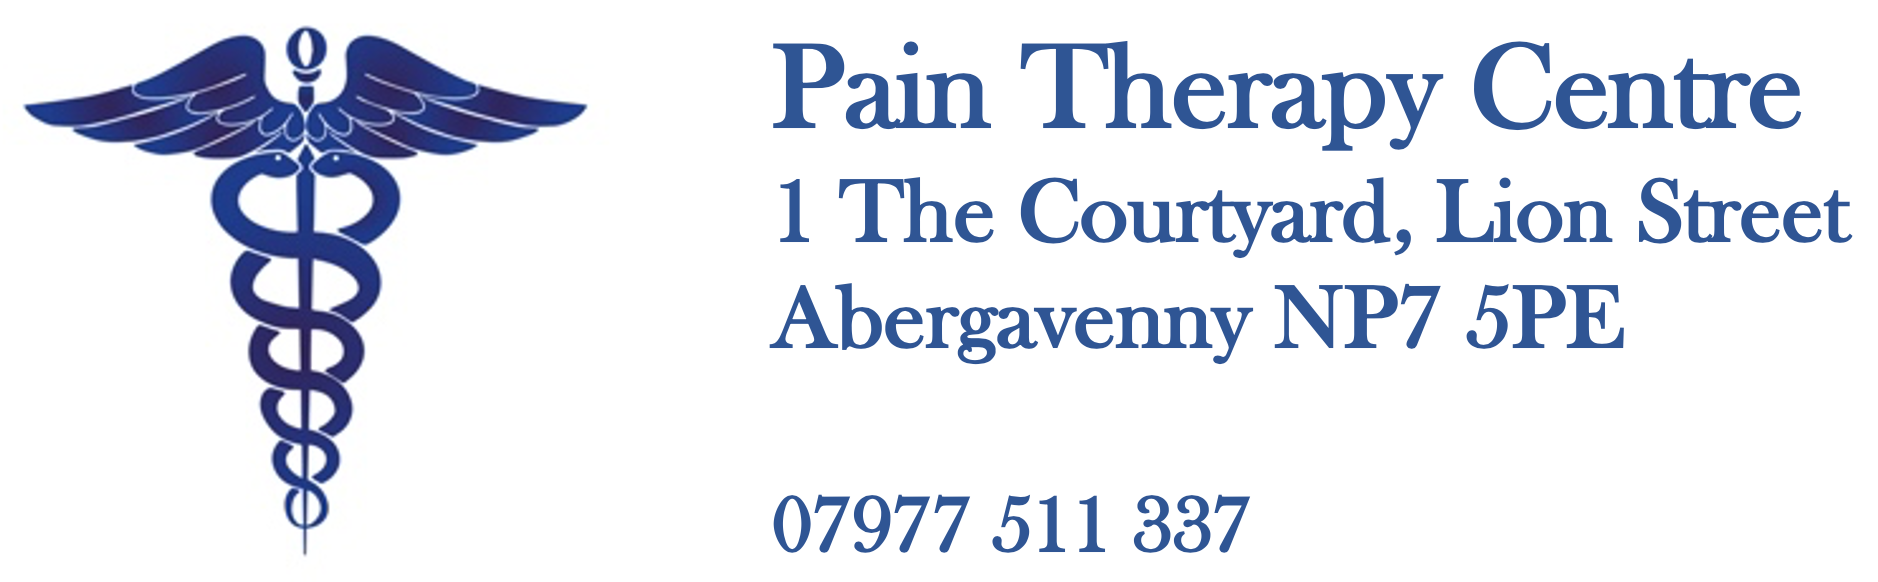 Pain Therapy Centre